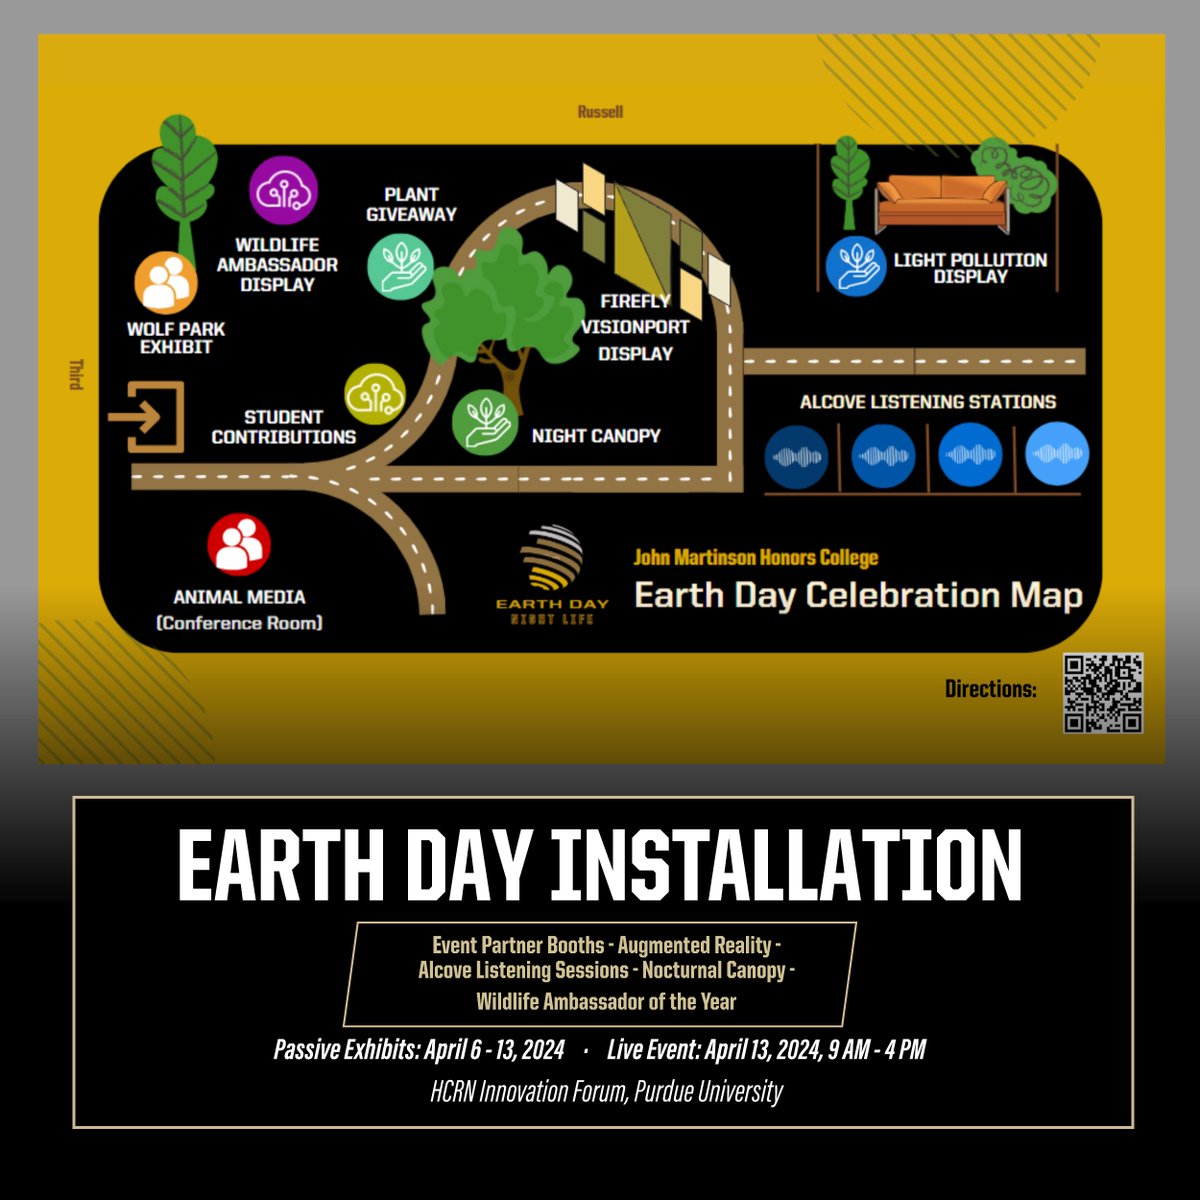 Join us for an immersive Earth Day experience! Explore our free installation at HCRN from April 6-13, featuring interactive booths, augmented reality, and more. Don't miss us at the JMHC Open House on April 12 from 3-5 p.m. and at the live event on Saturday!